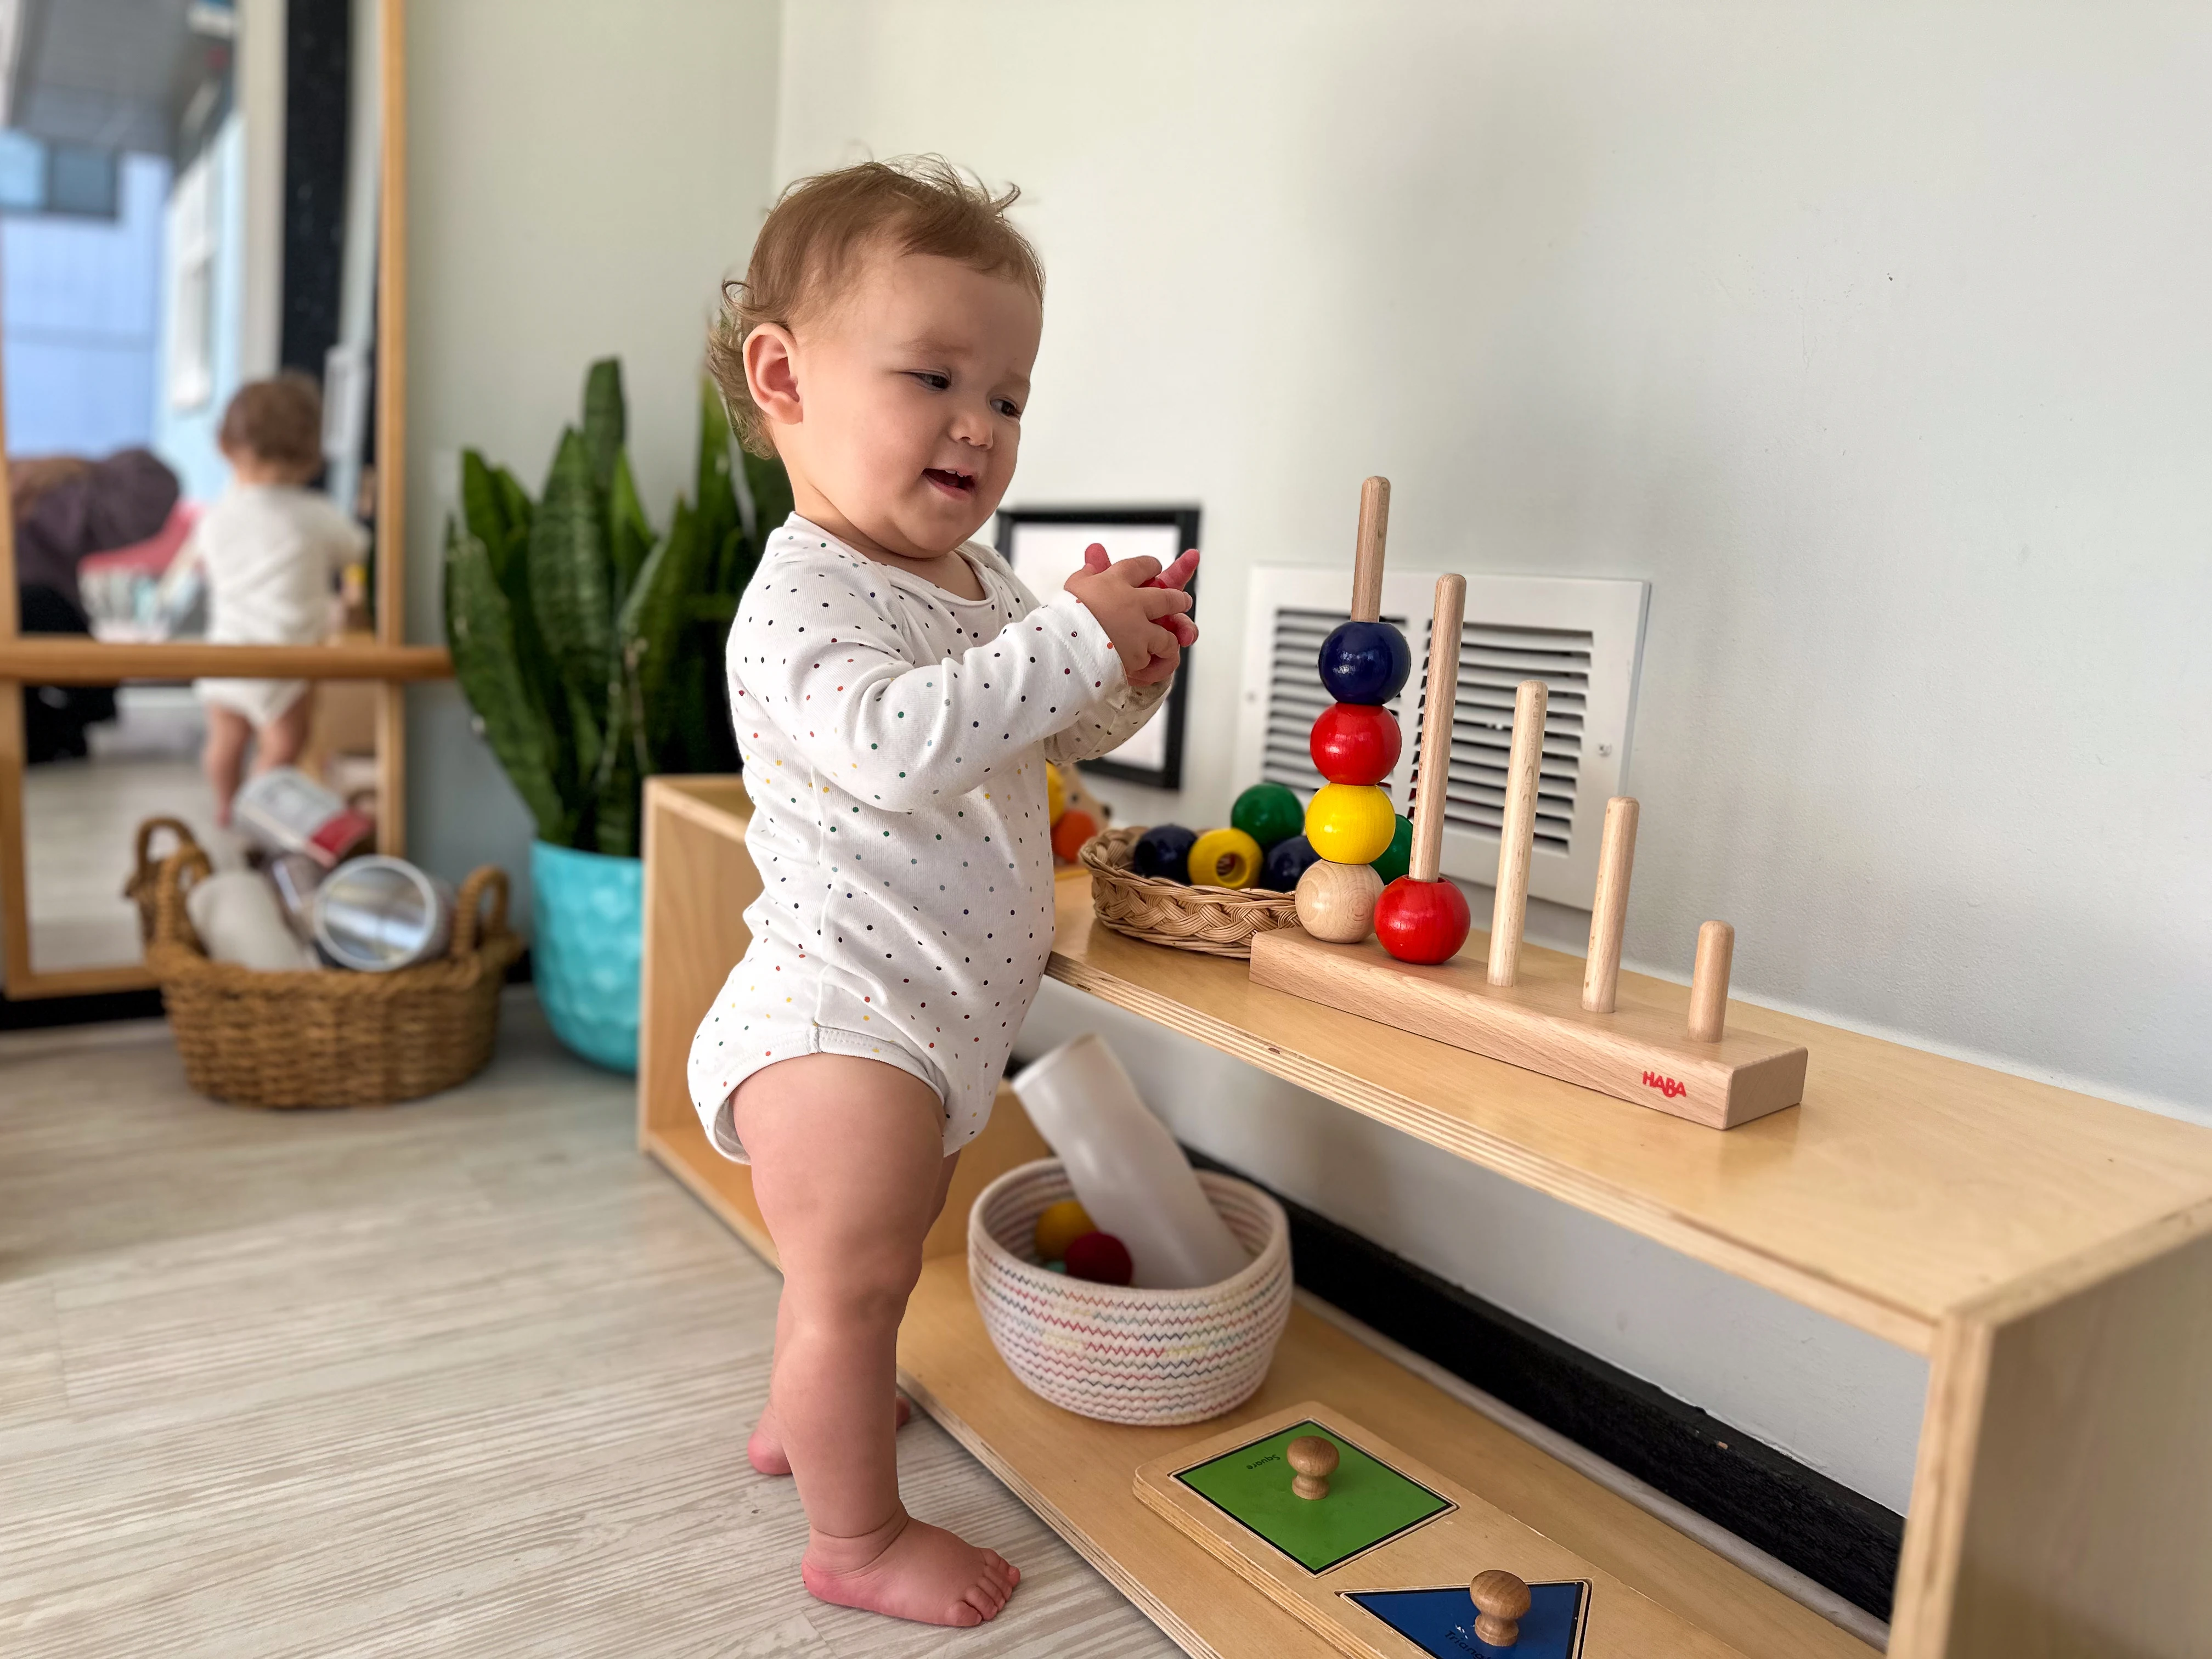 14-month-old Montessori toddler stands at shelf and places colorful balls onto posting toy in her Montessori playroom. These fun toys support Montessori learning at home.